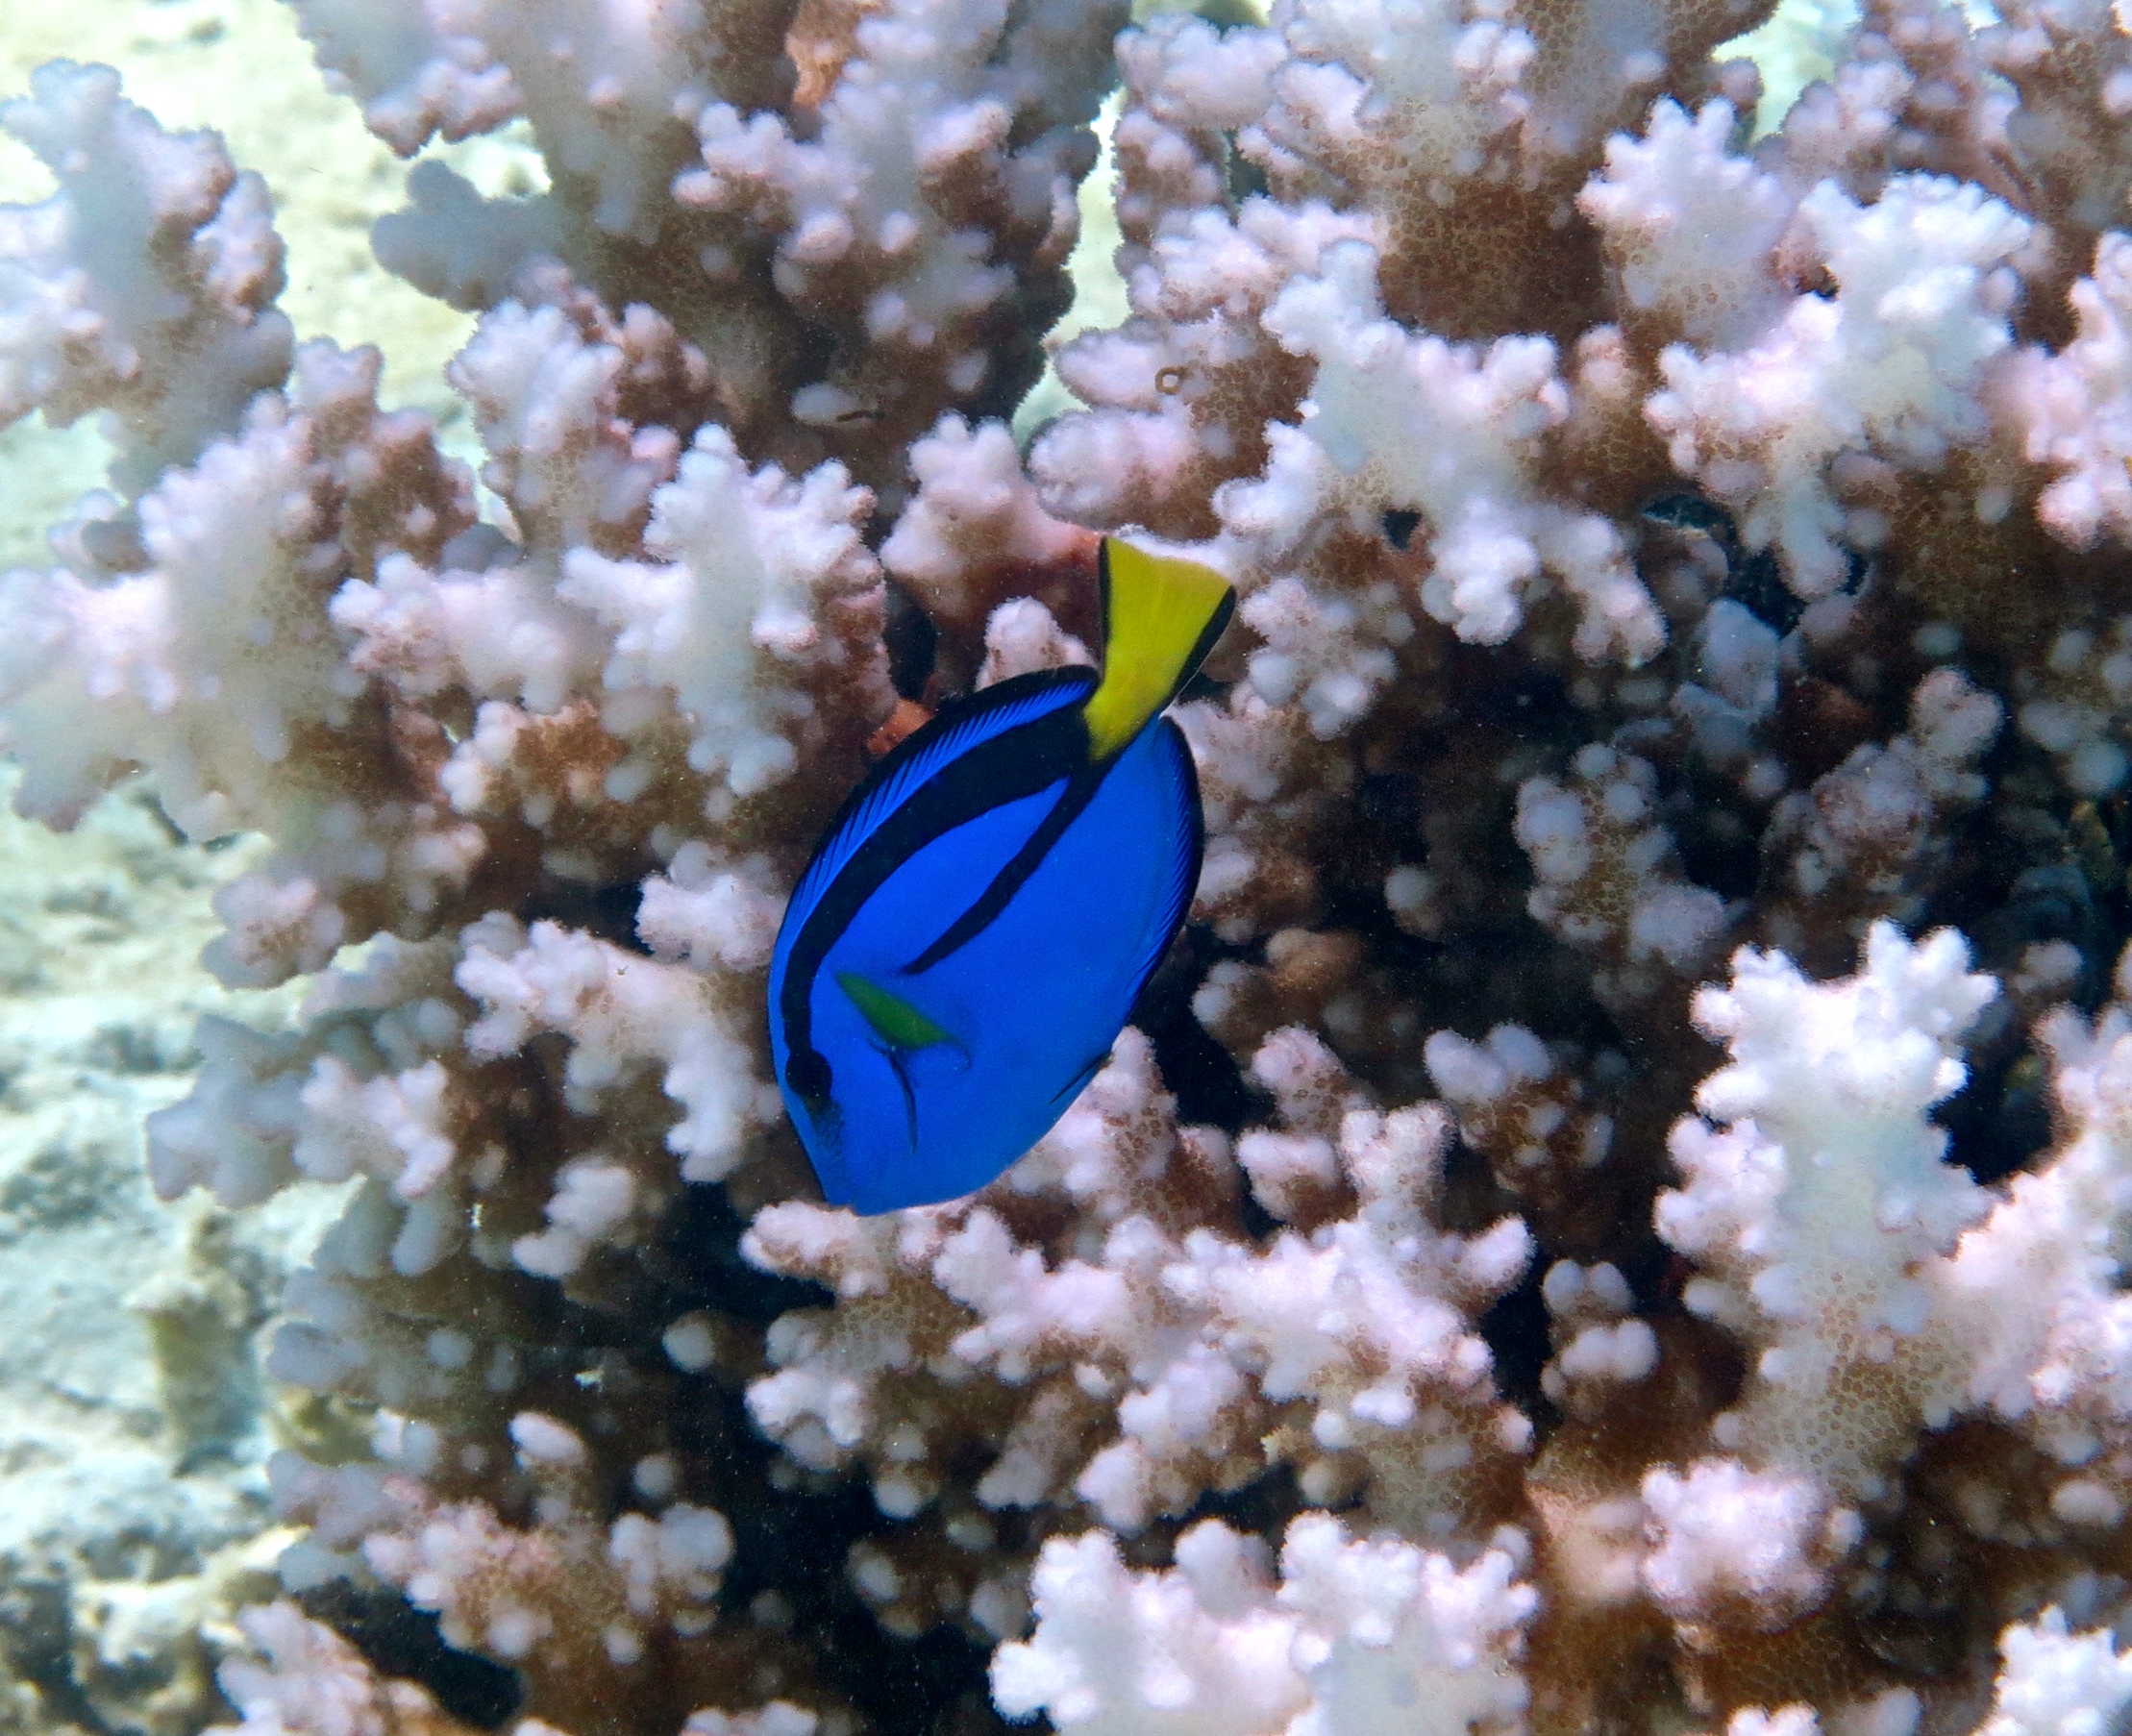 QBI researchers believe Dory, the surgeonfish made famous by Pixar’s Finding Nemo and Finding Dory, may hold clues as to how fish adapt to changes in their environment.